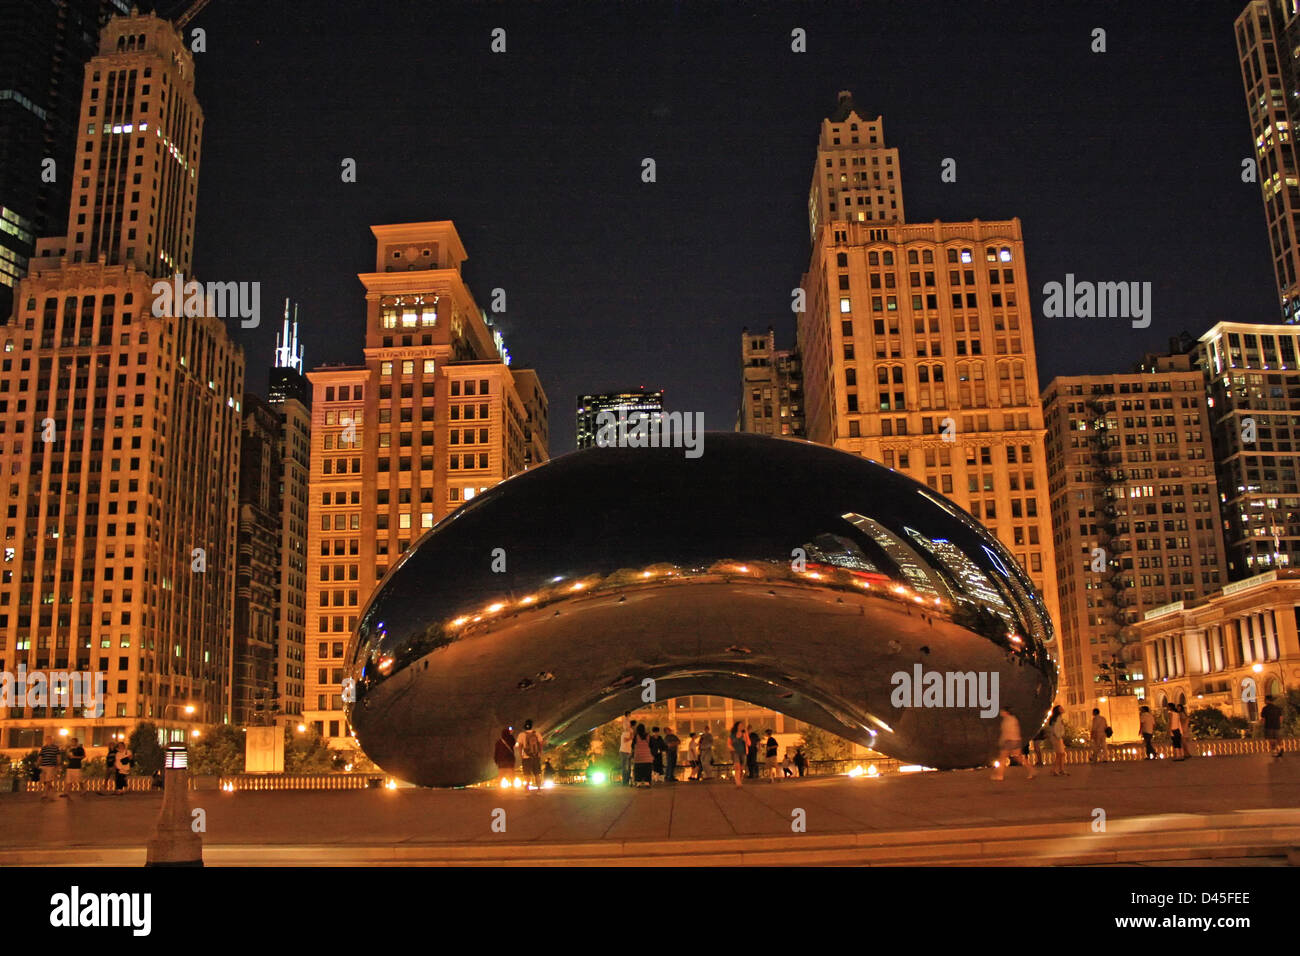 Cloud Gate,  is the centerpiece of the AT&T Plaza in Millennium Park within the Loop community area of Chicago, Illinois, United Stock Photo